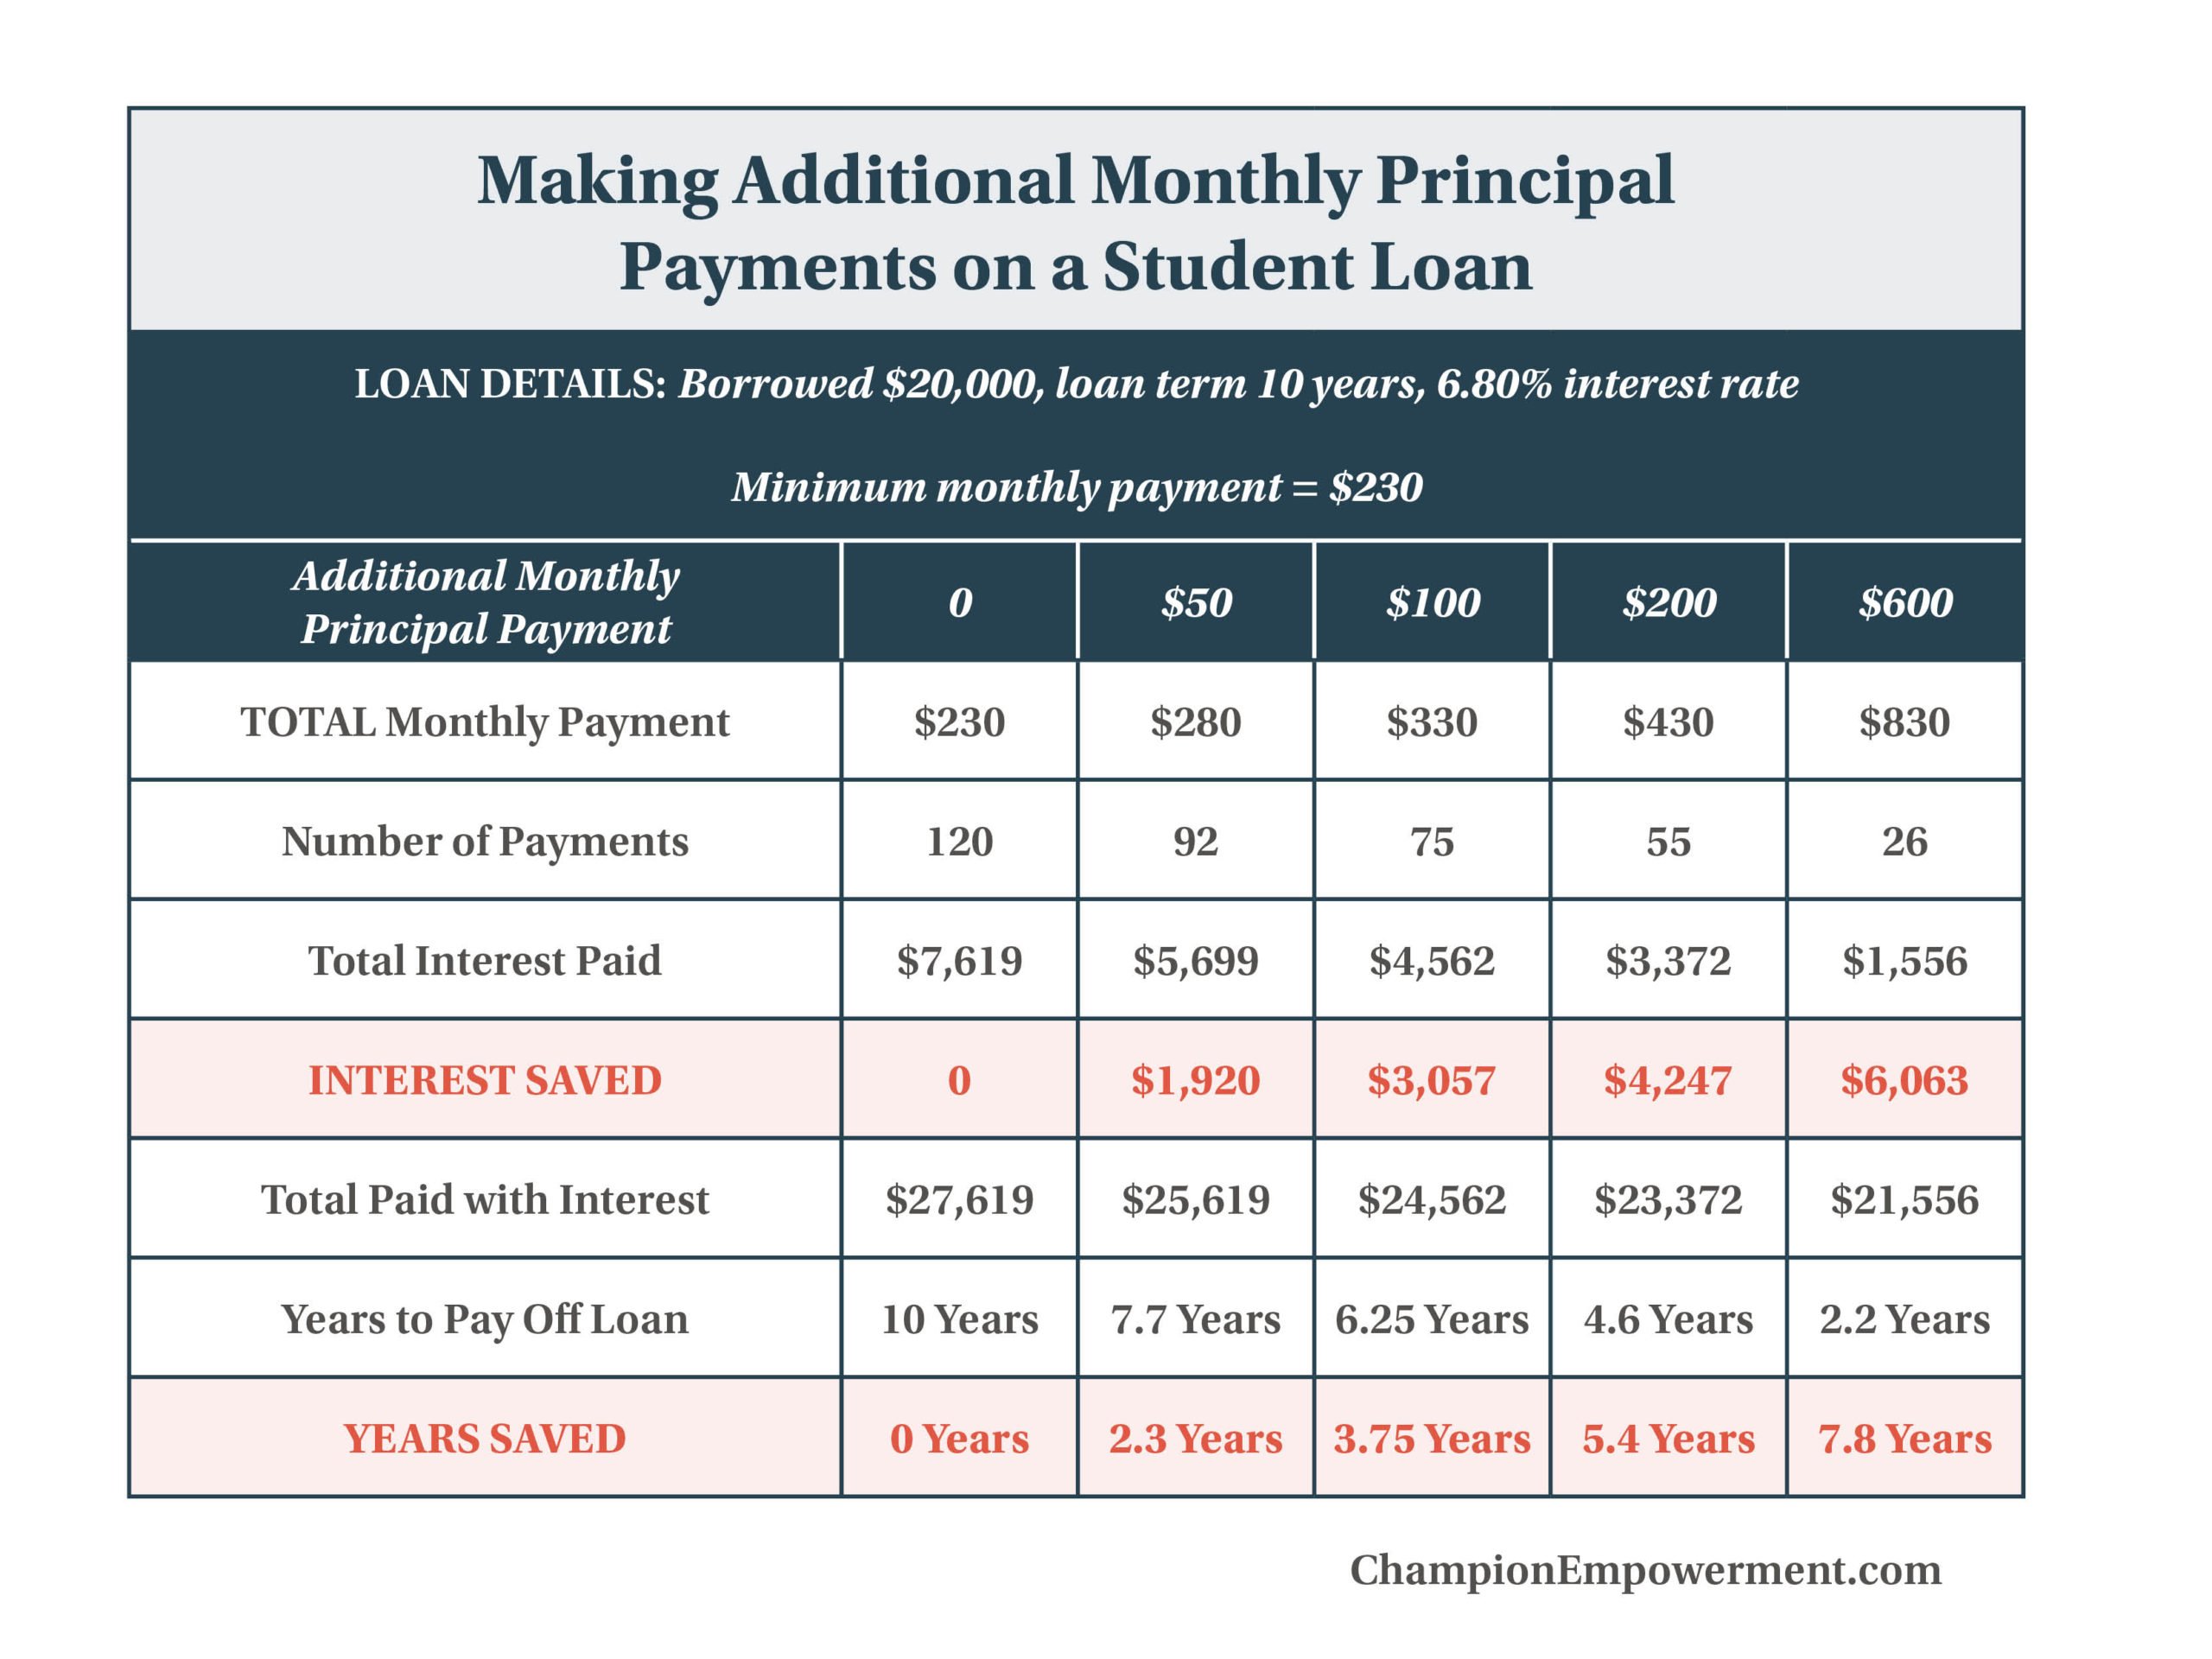 Making Principal Payments on Student Loans